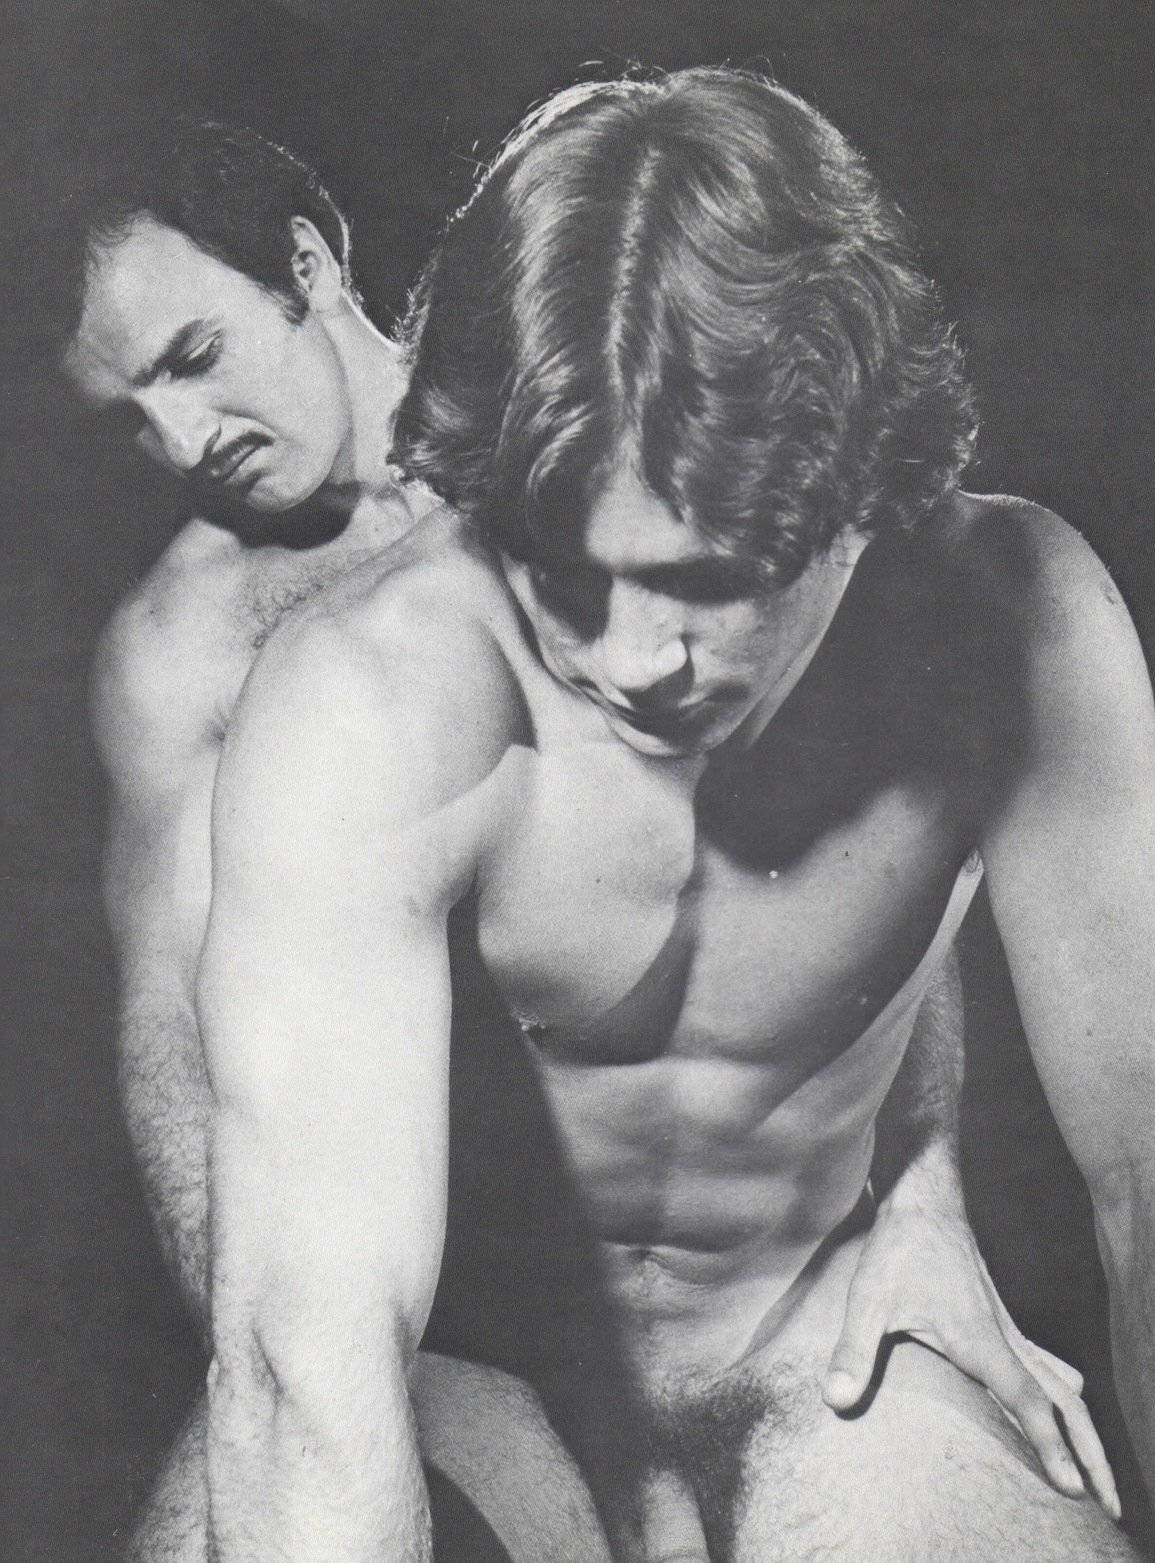 Sultry and Sensual: Vintage Beefcake Nudes for the Adult Connoisseur